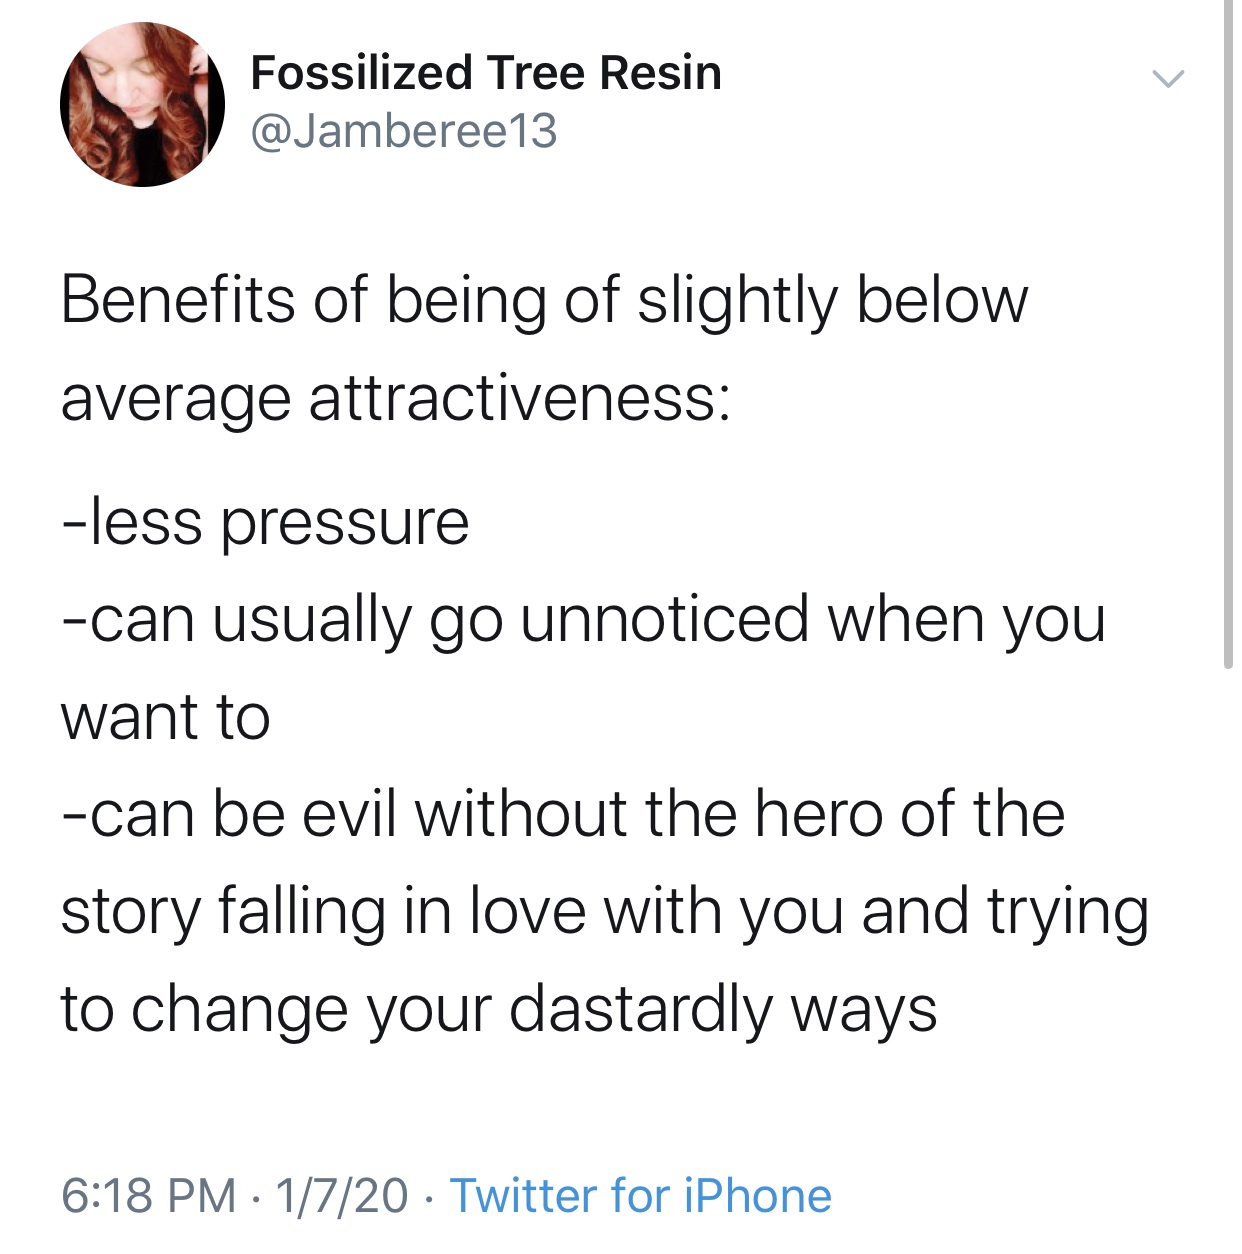 angle - Fossilized Tree Resin Benefits of being of slightly below average attractiveness less pressure can usually go unnoticed when you want to can be evil without the hero of the story falling in love with you and trying to change your dastardly ways 17